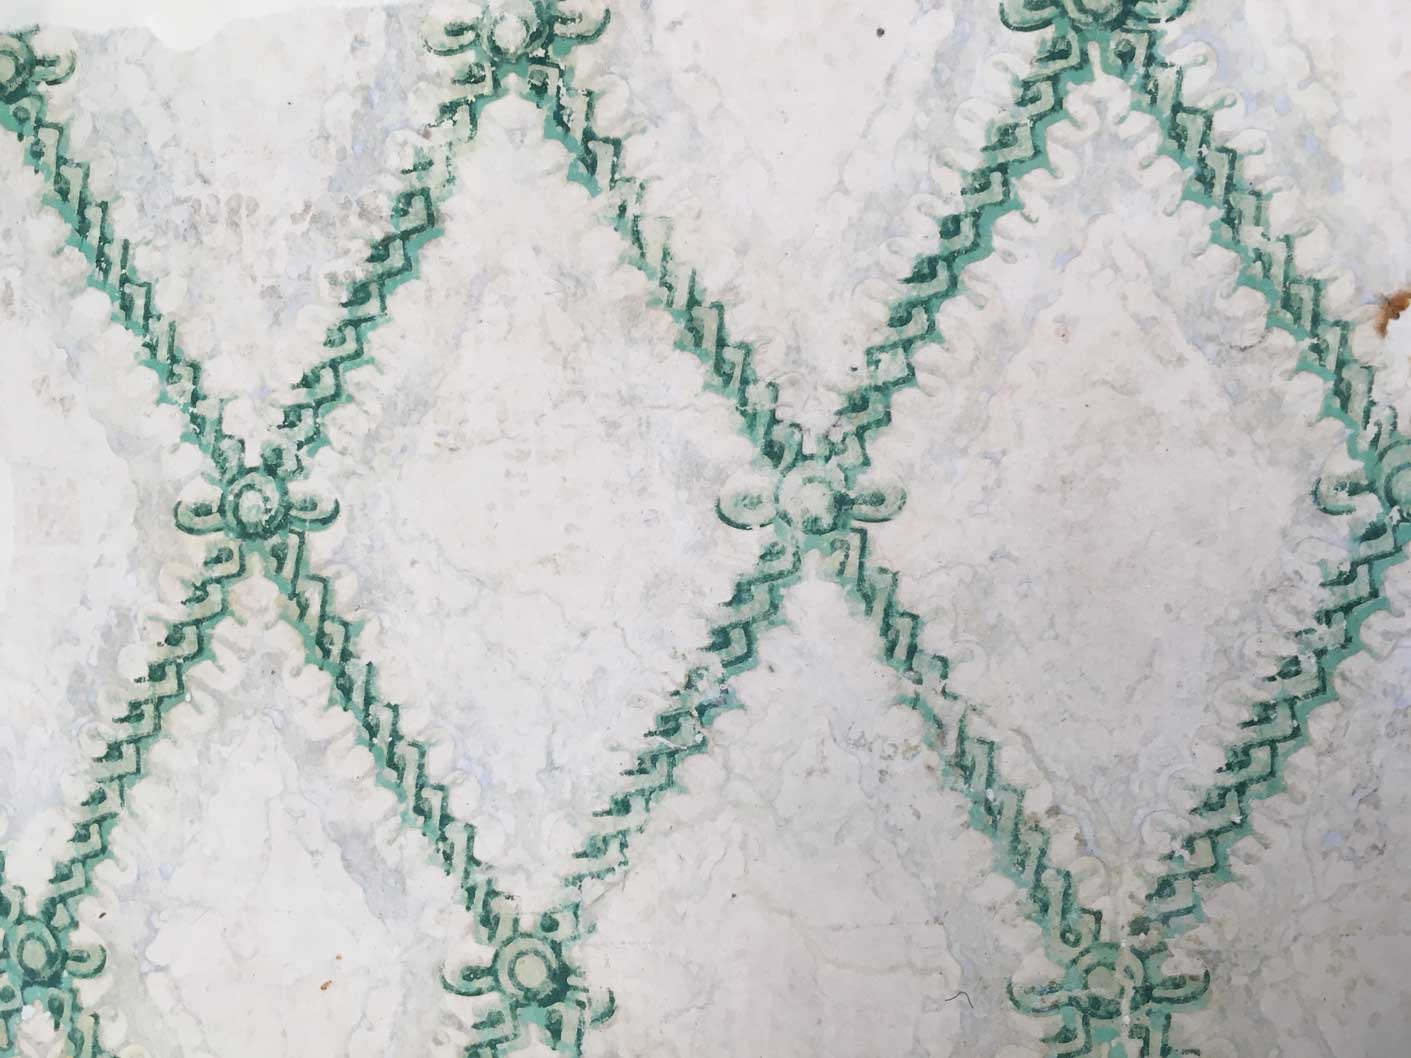 A historic wallpaper featuring a floral diamond pattern. The green pigment contains arsenic.